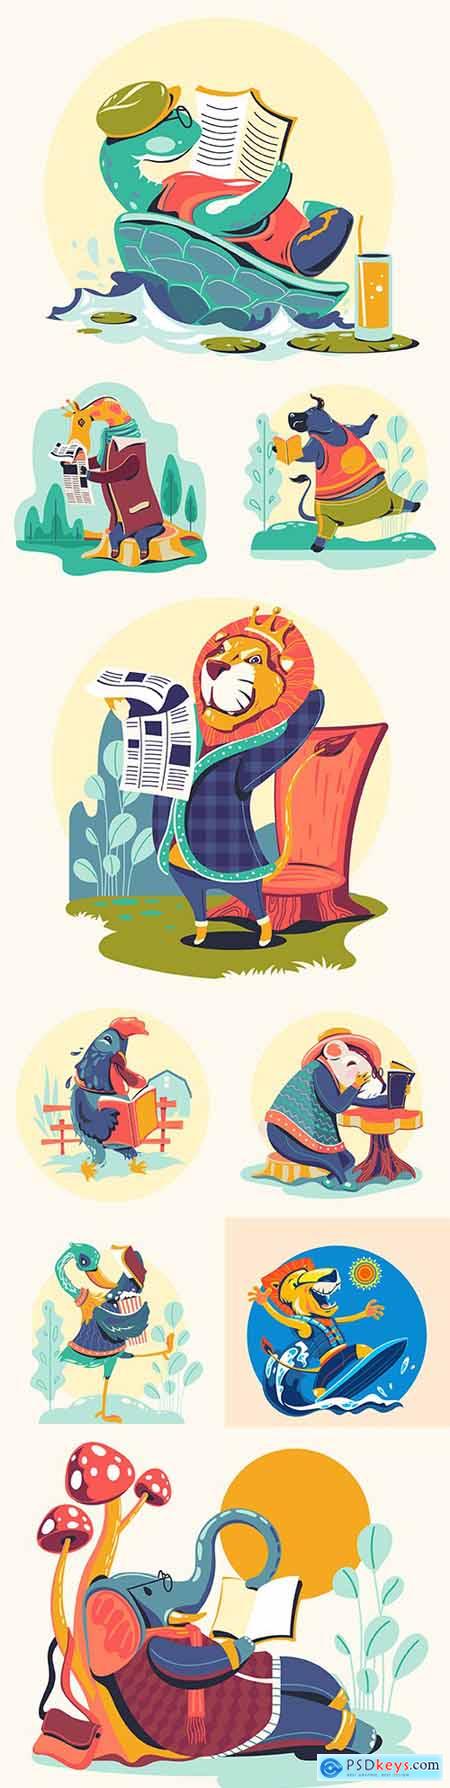 Funny animal characters painted colorful illustrations